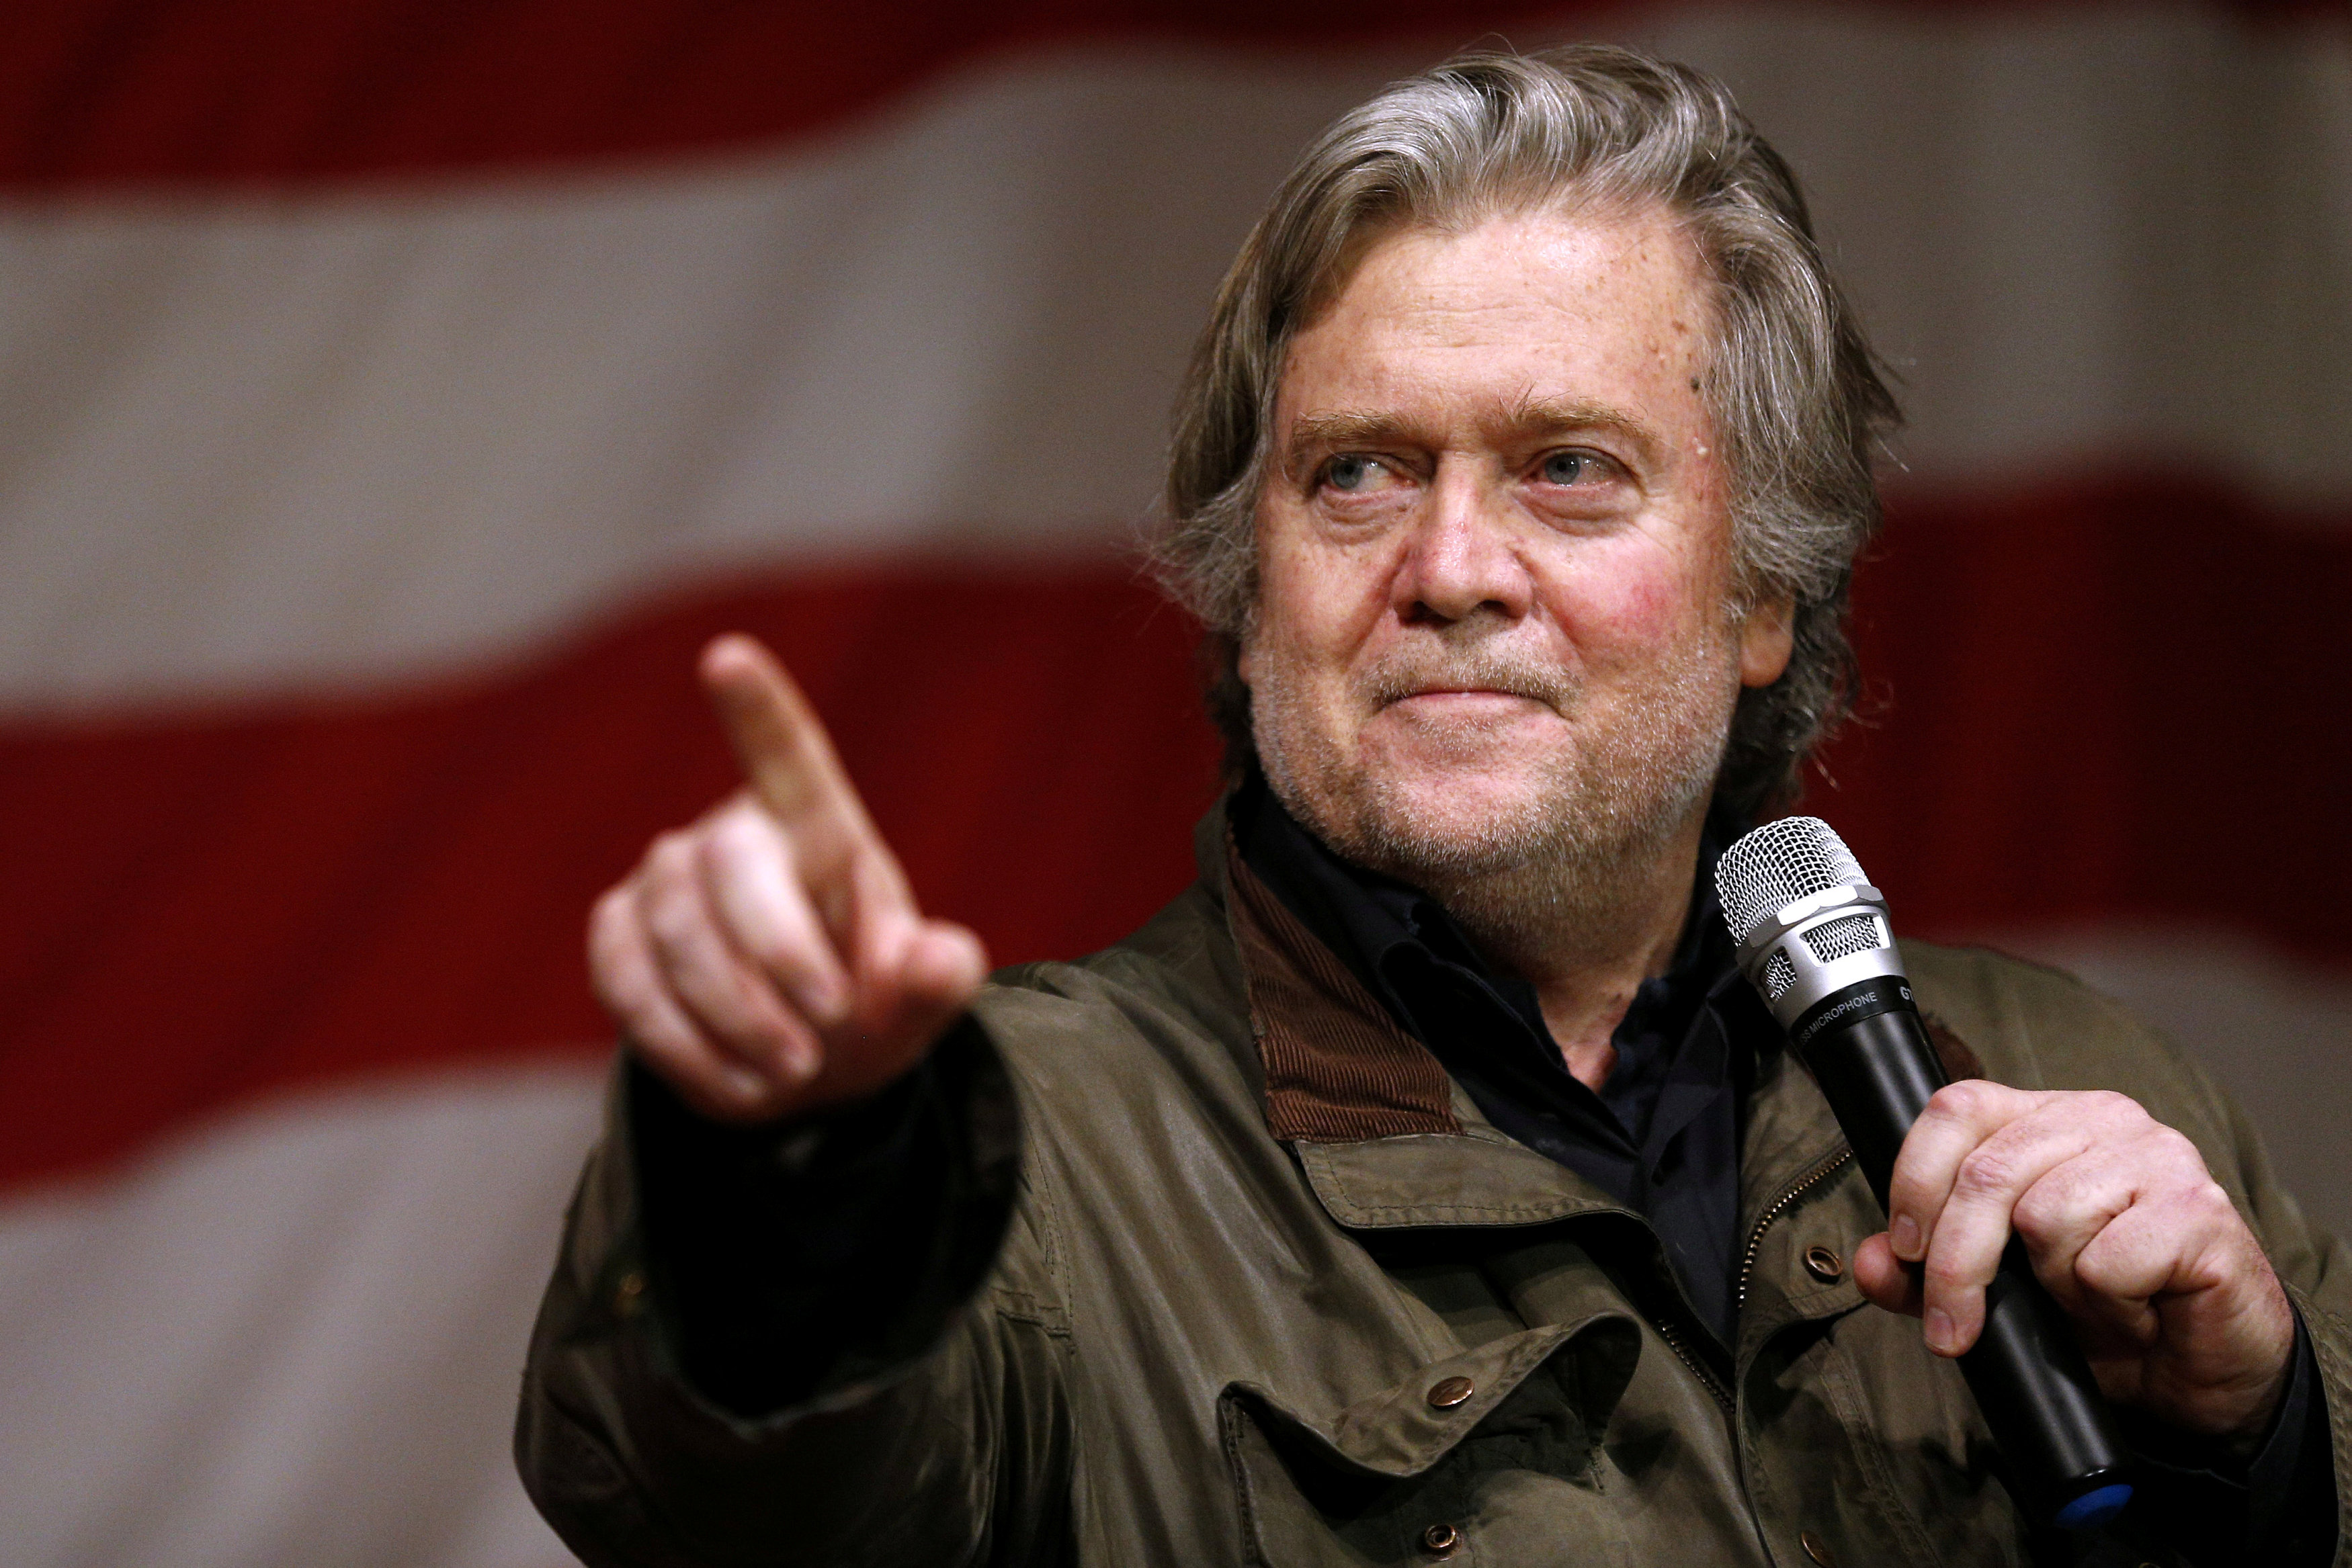 Bannon to meet with House panel on Russia